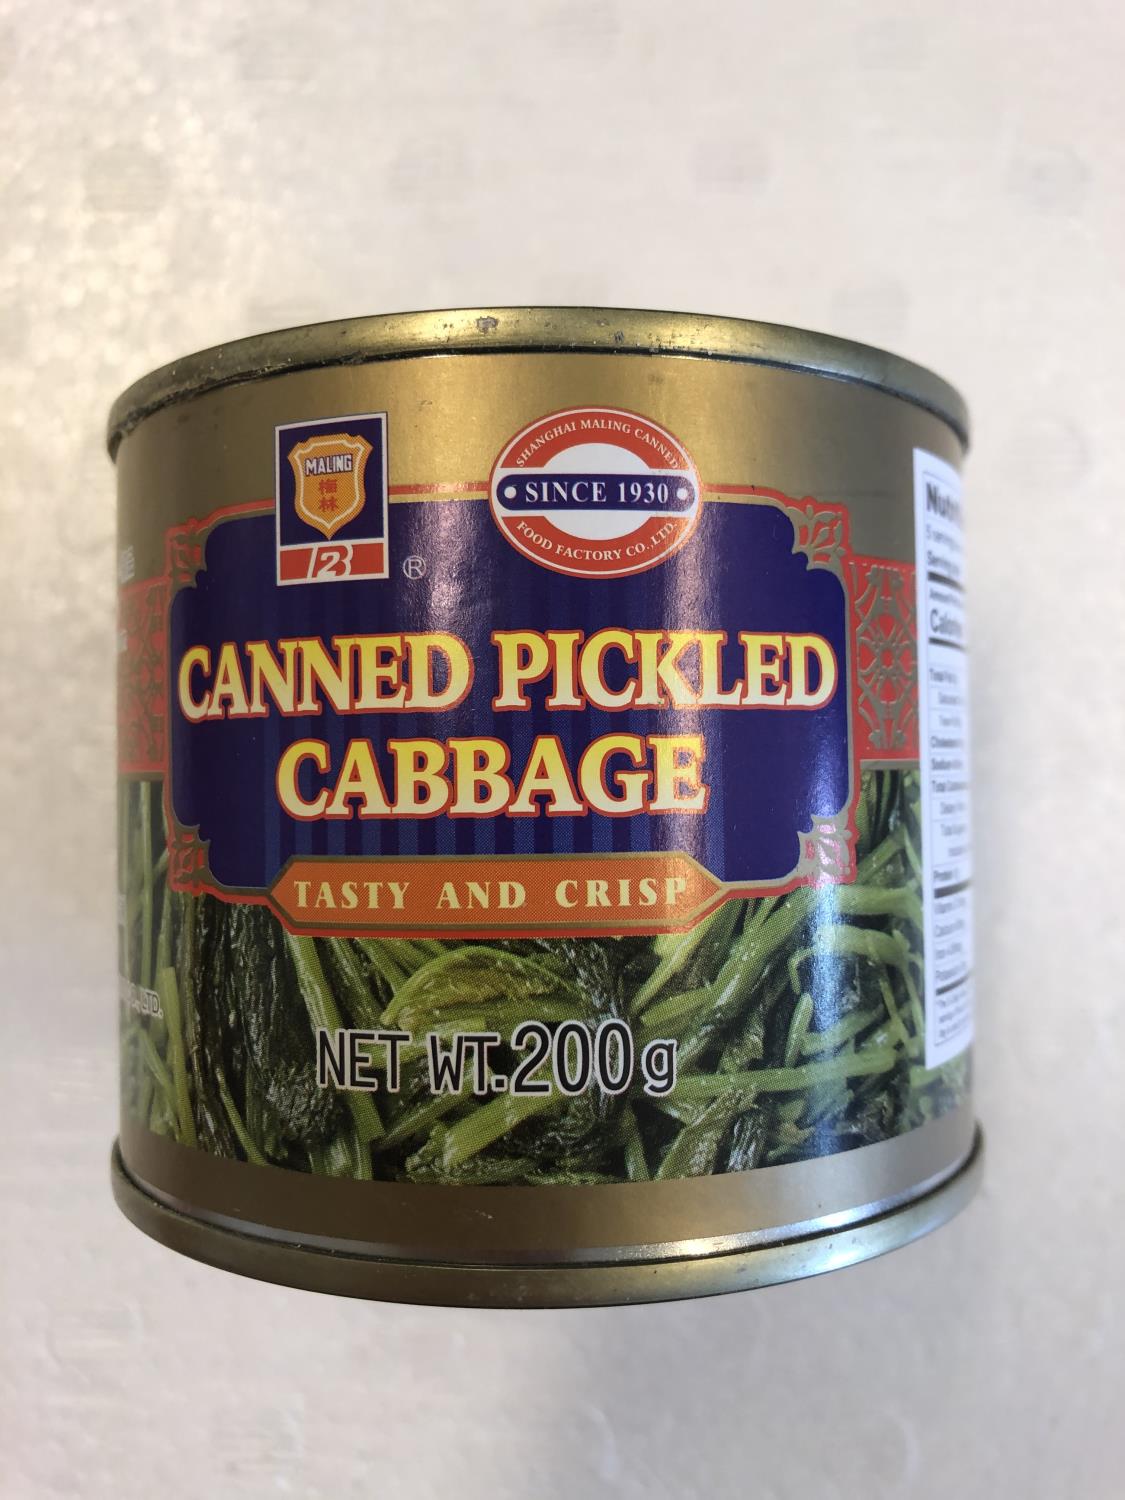 'MALING Canned Pickled Cabbage 200g